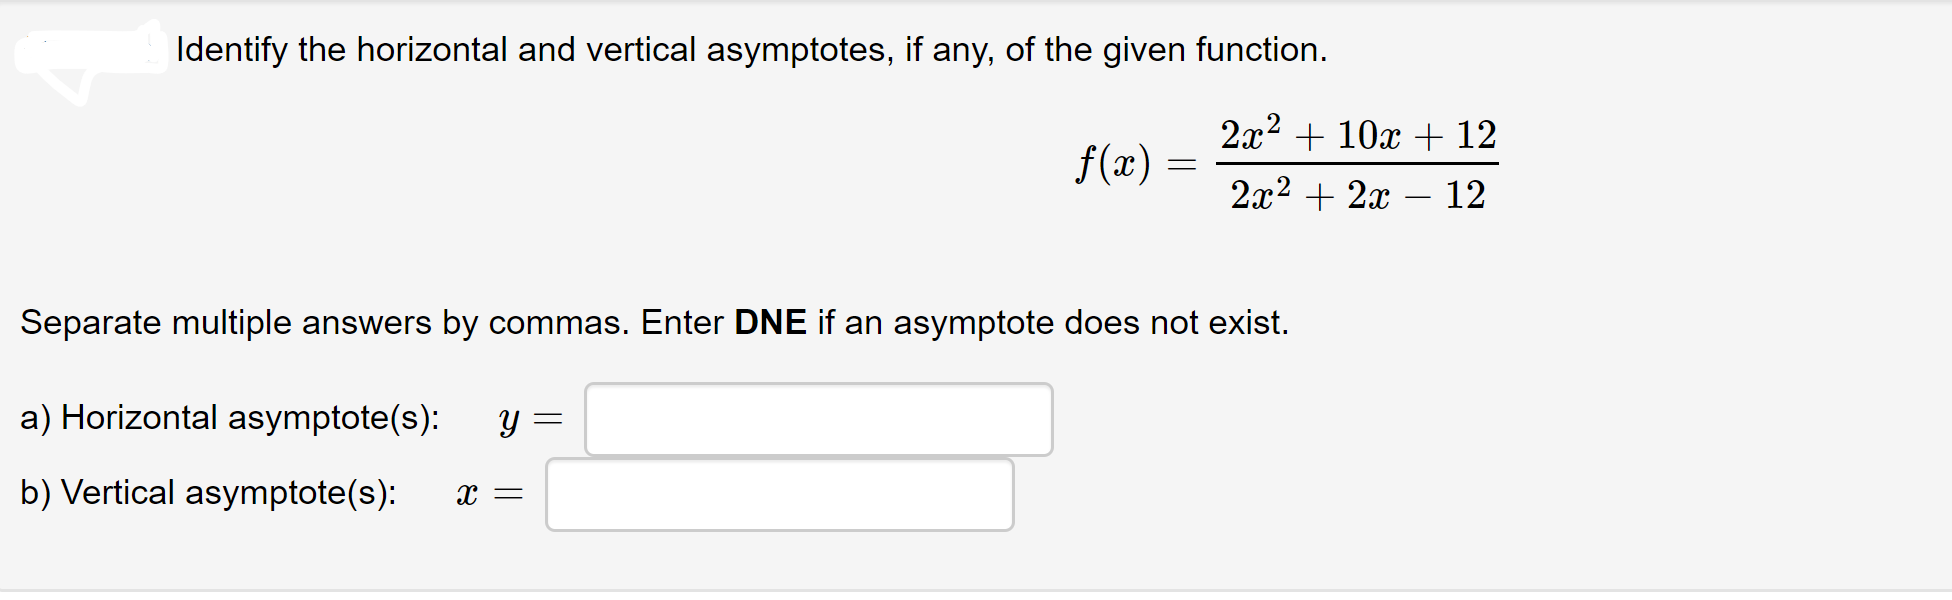 Identify the horizontal and vertical asymptotes, if any, of the given function.
2x2 + 10x + 12
f(x) :
2x2 + 2x – 12
